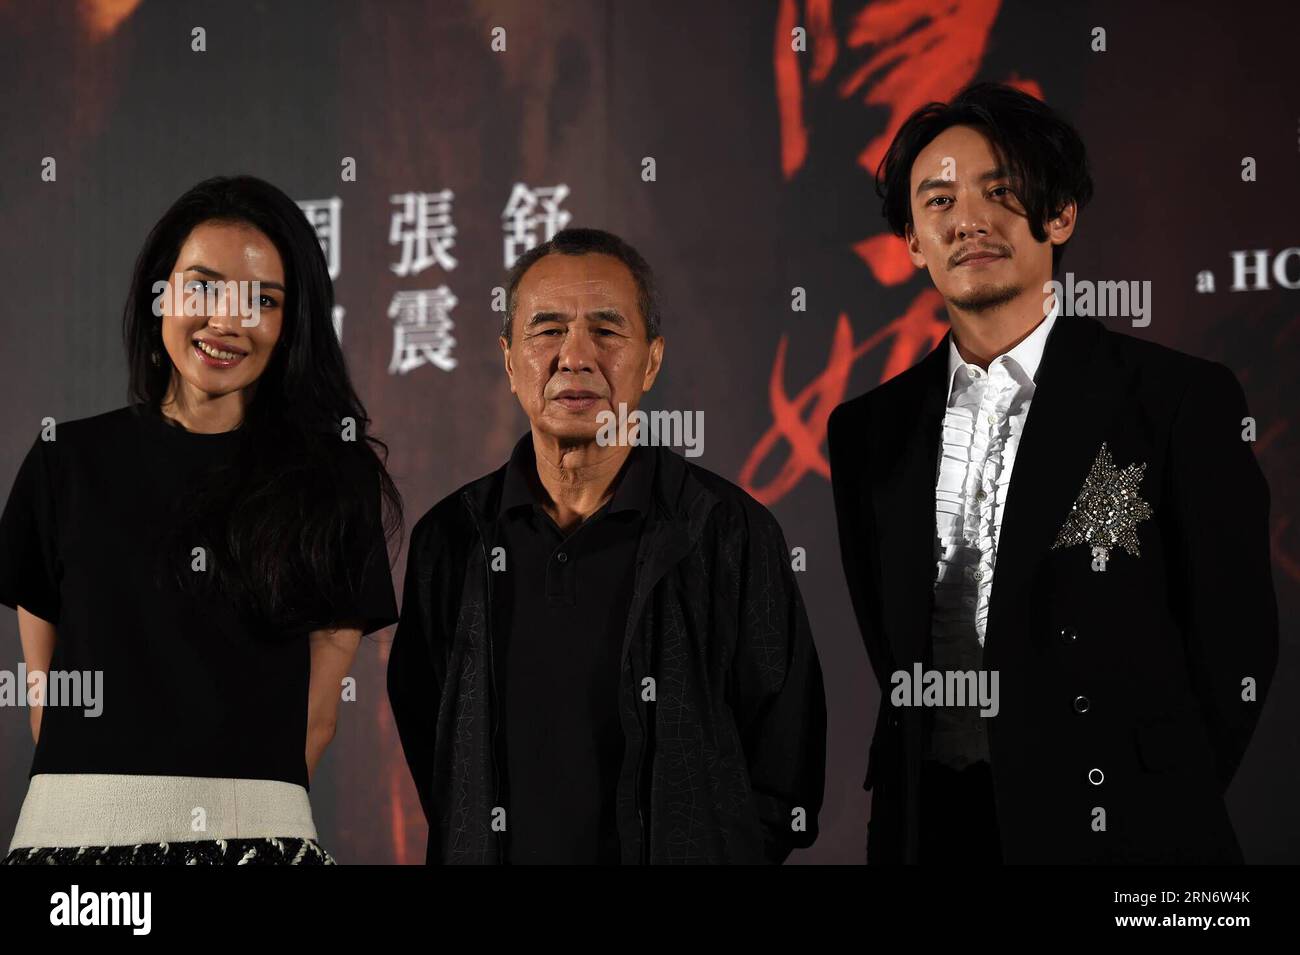 (150807) -- TAIPEI, Aug. 7, 2015 -- Director Hou Hsiao-Hsien (C), actress Shu Qi (L), and actor Chang Chen attend a press conference to promote the movie The Assassin in Taipei, southeast China s Taiwan, Aug. 7, 2015. The movie is to be screened on Aug. 28 in Taiwan. ) (hgh) CHINA-TAIPEI-MOVIE THE ASSASSIN -PRESS CONFERENCE (CN) HanxYuqing PUBLICATIONxNOTxINxCHN   150807 Taipei Aug 7 2015 Director Hou Hsiao Hsien C actress Shu Qi l and Actor Chang Chen attend a Press Conference to promote The Movie The Assassin in Taipei South East China S TAIWAN Aug 7 2015 The Movie IS to Be screened ON Aug 2 Stock Photo